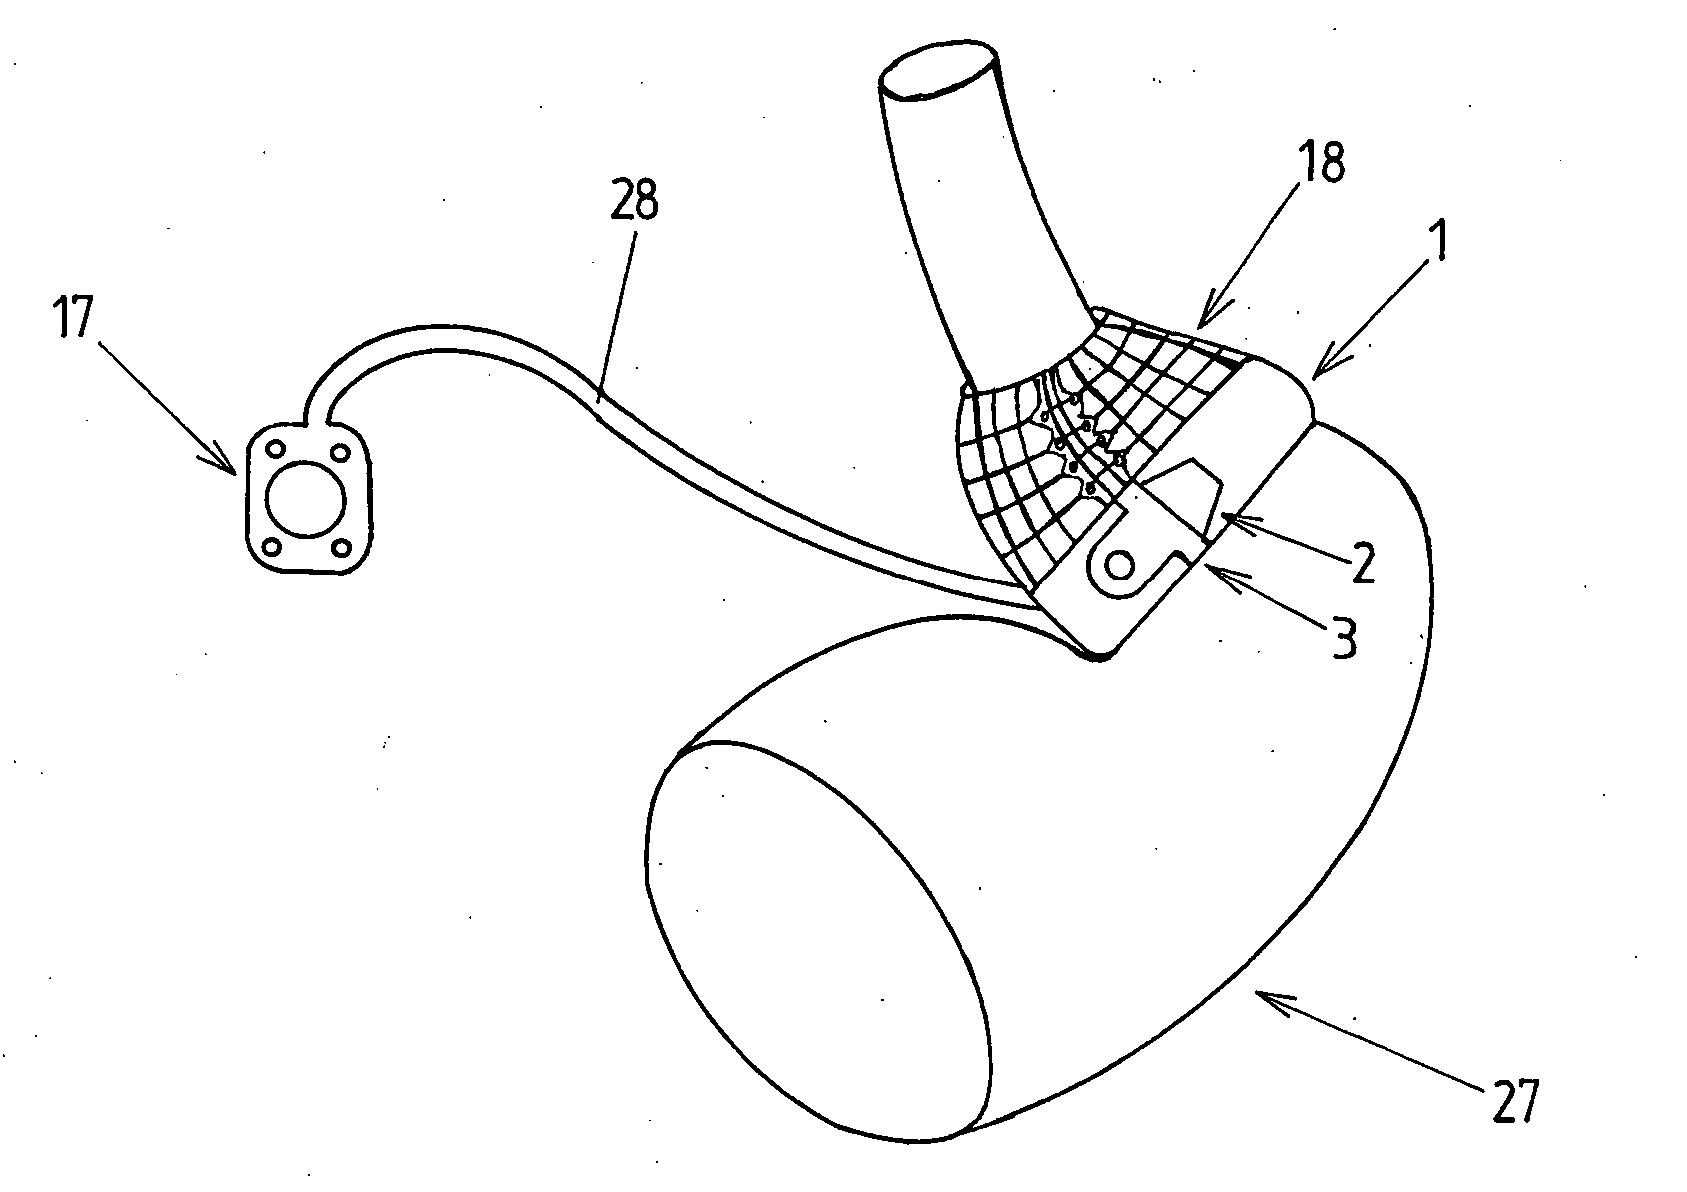 Device for treating obesity